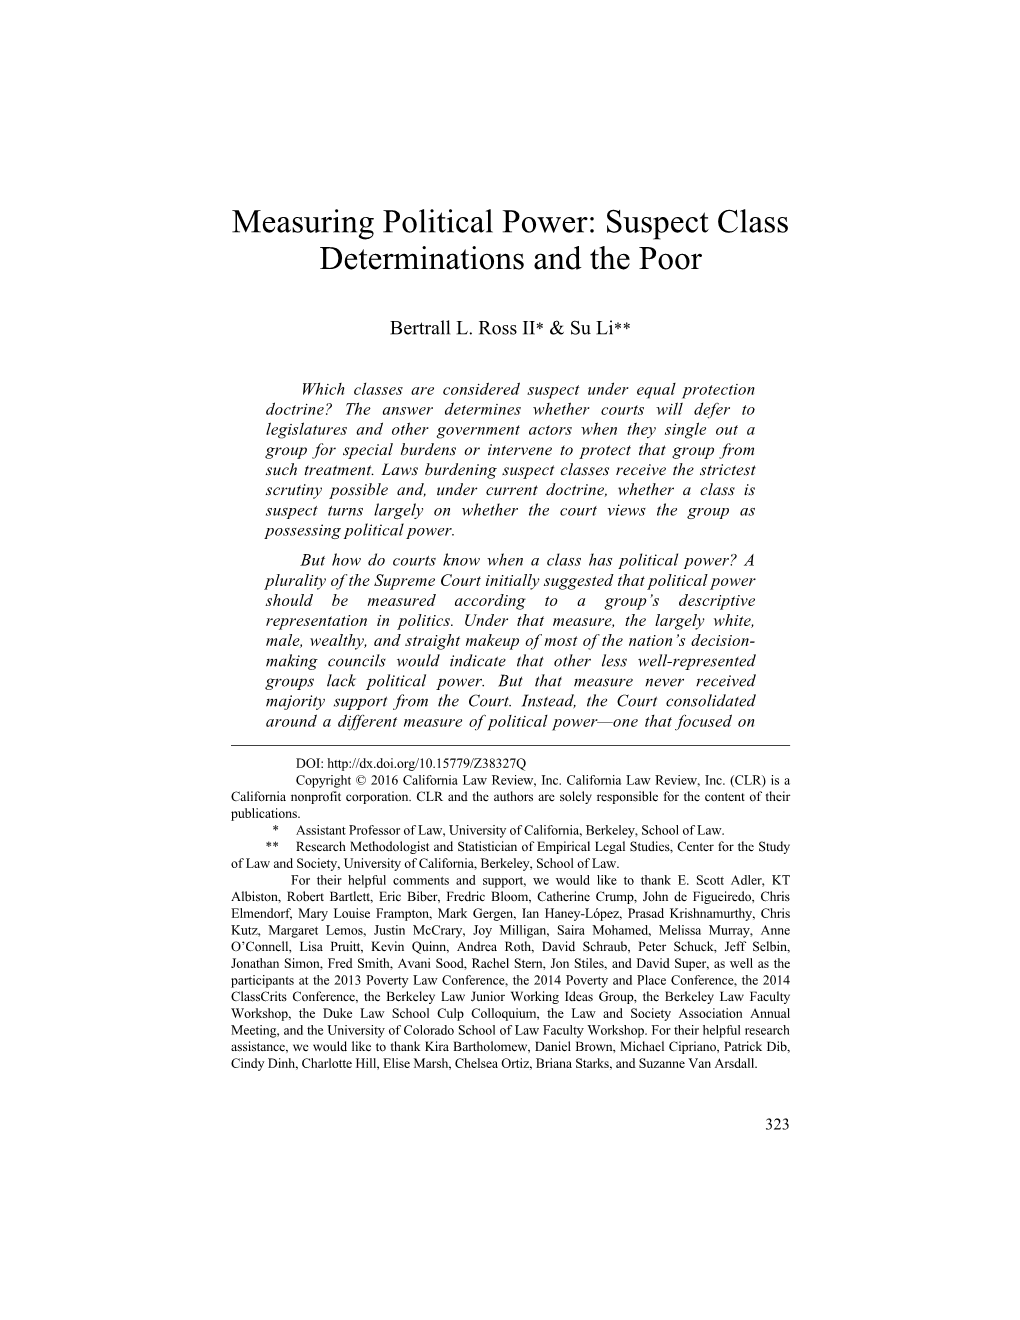 Measuring Political Power: Suspect Class Determinations and the Poor